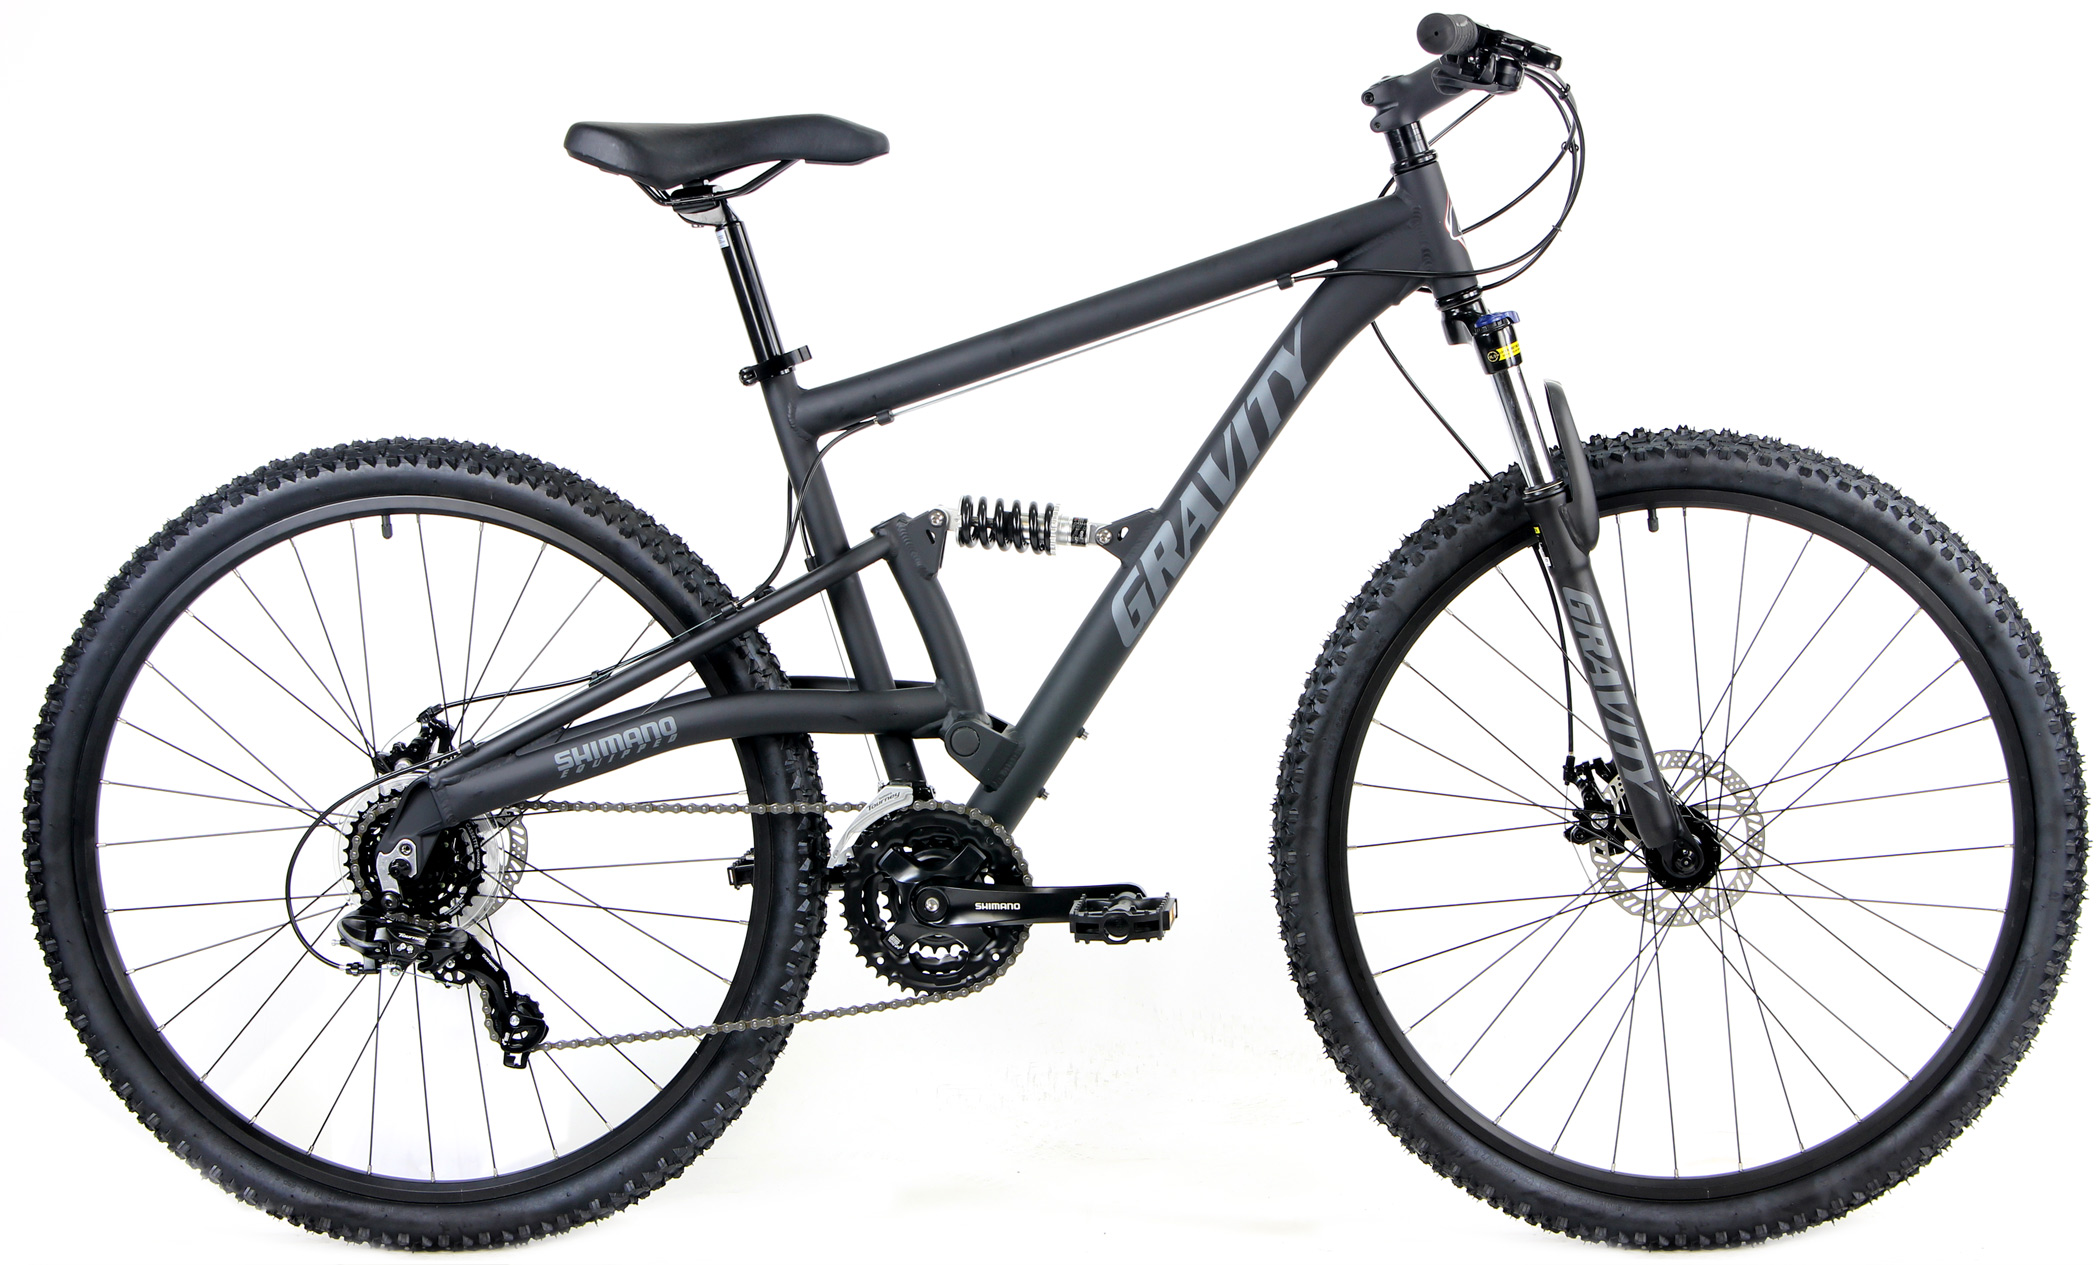 Save up to 60% off new 29er Mountain Bikes - MTB - Gravity Shimano 